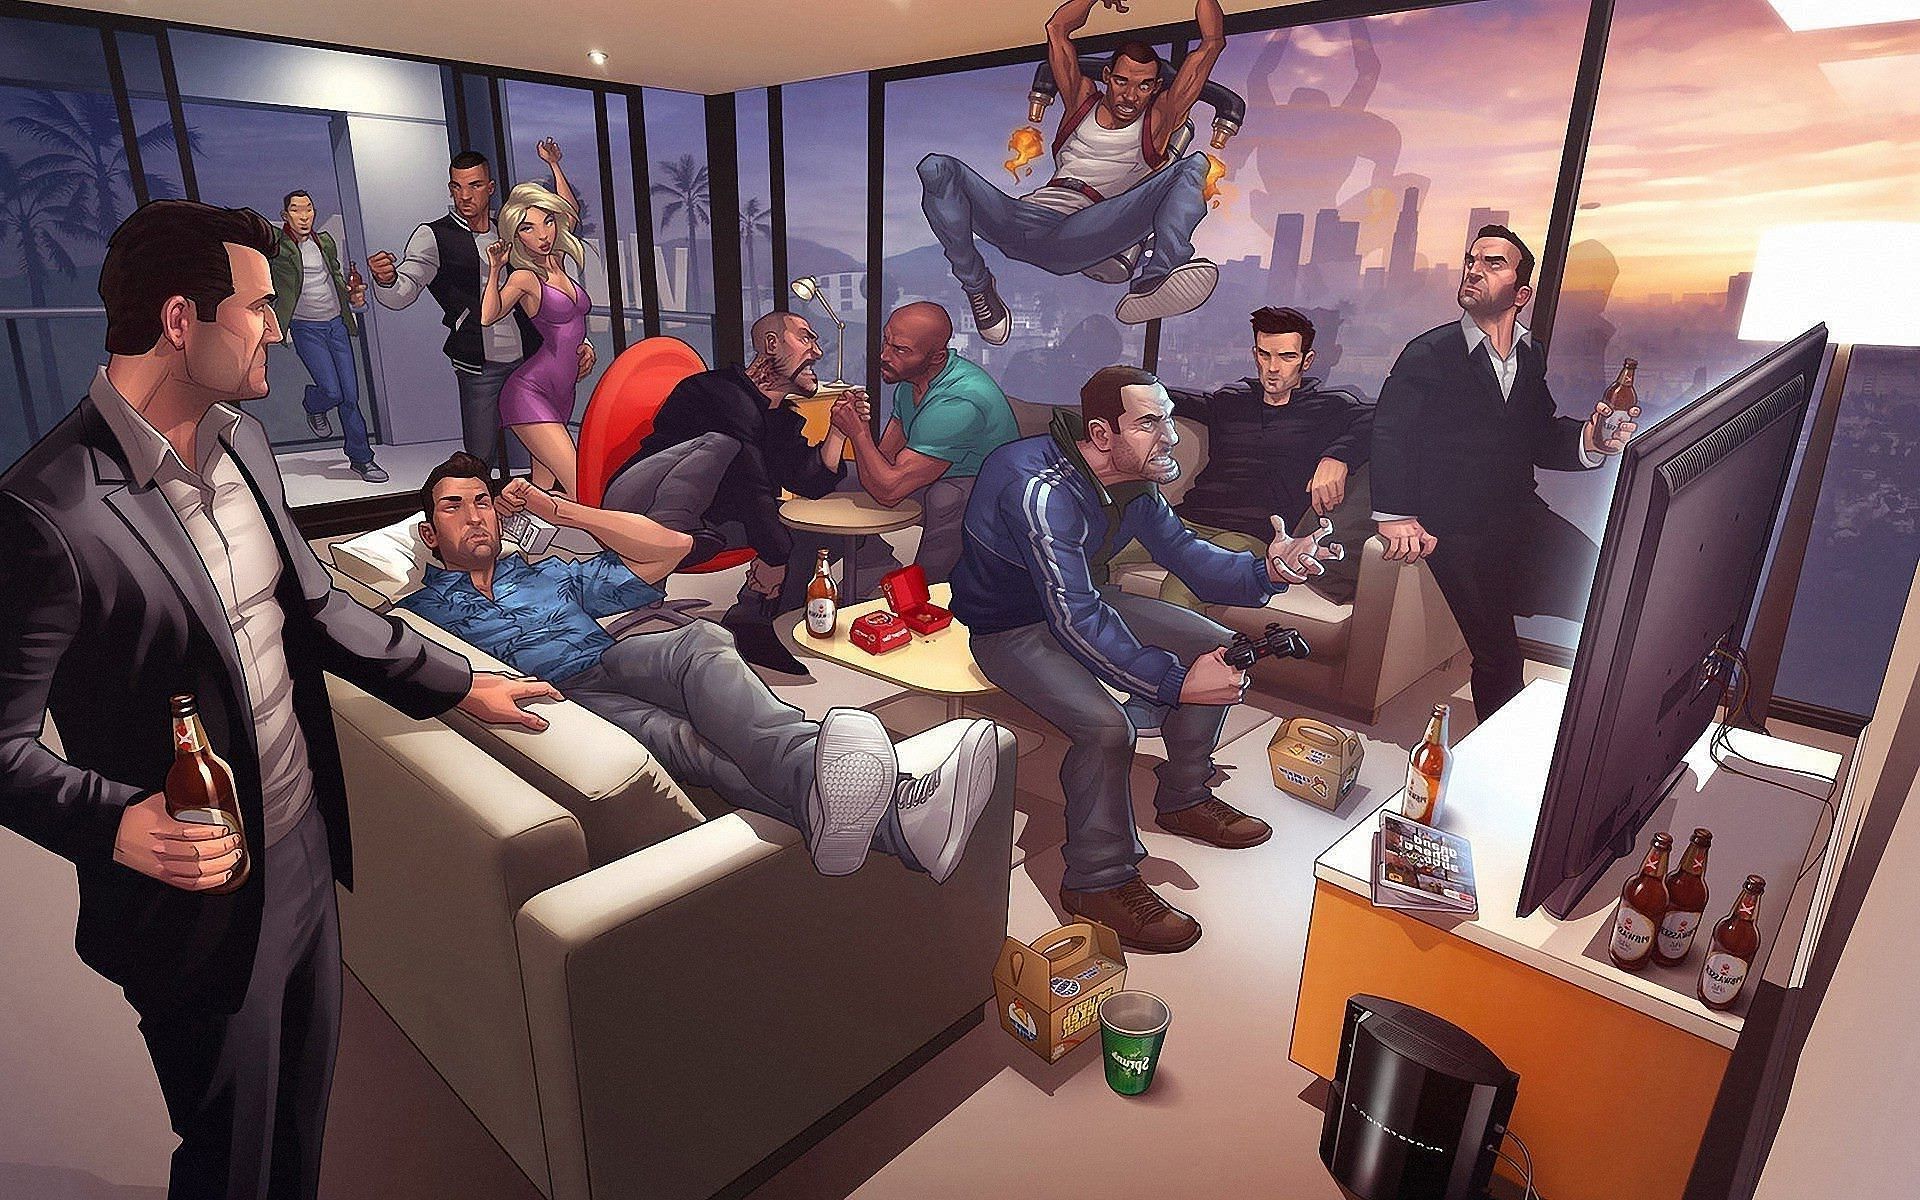 GTA design head offers rationale behind ditching single-player DLC